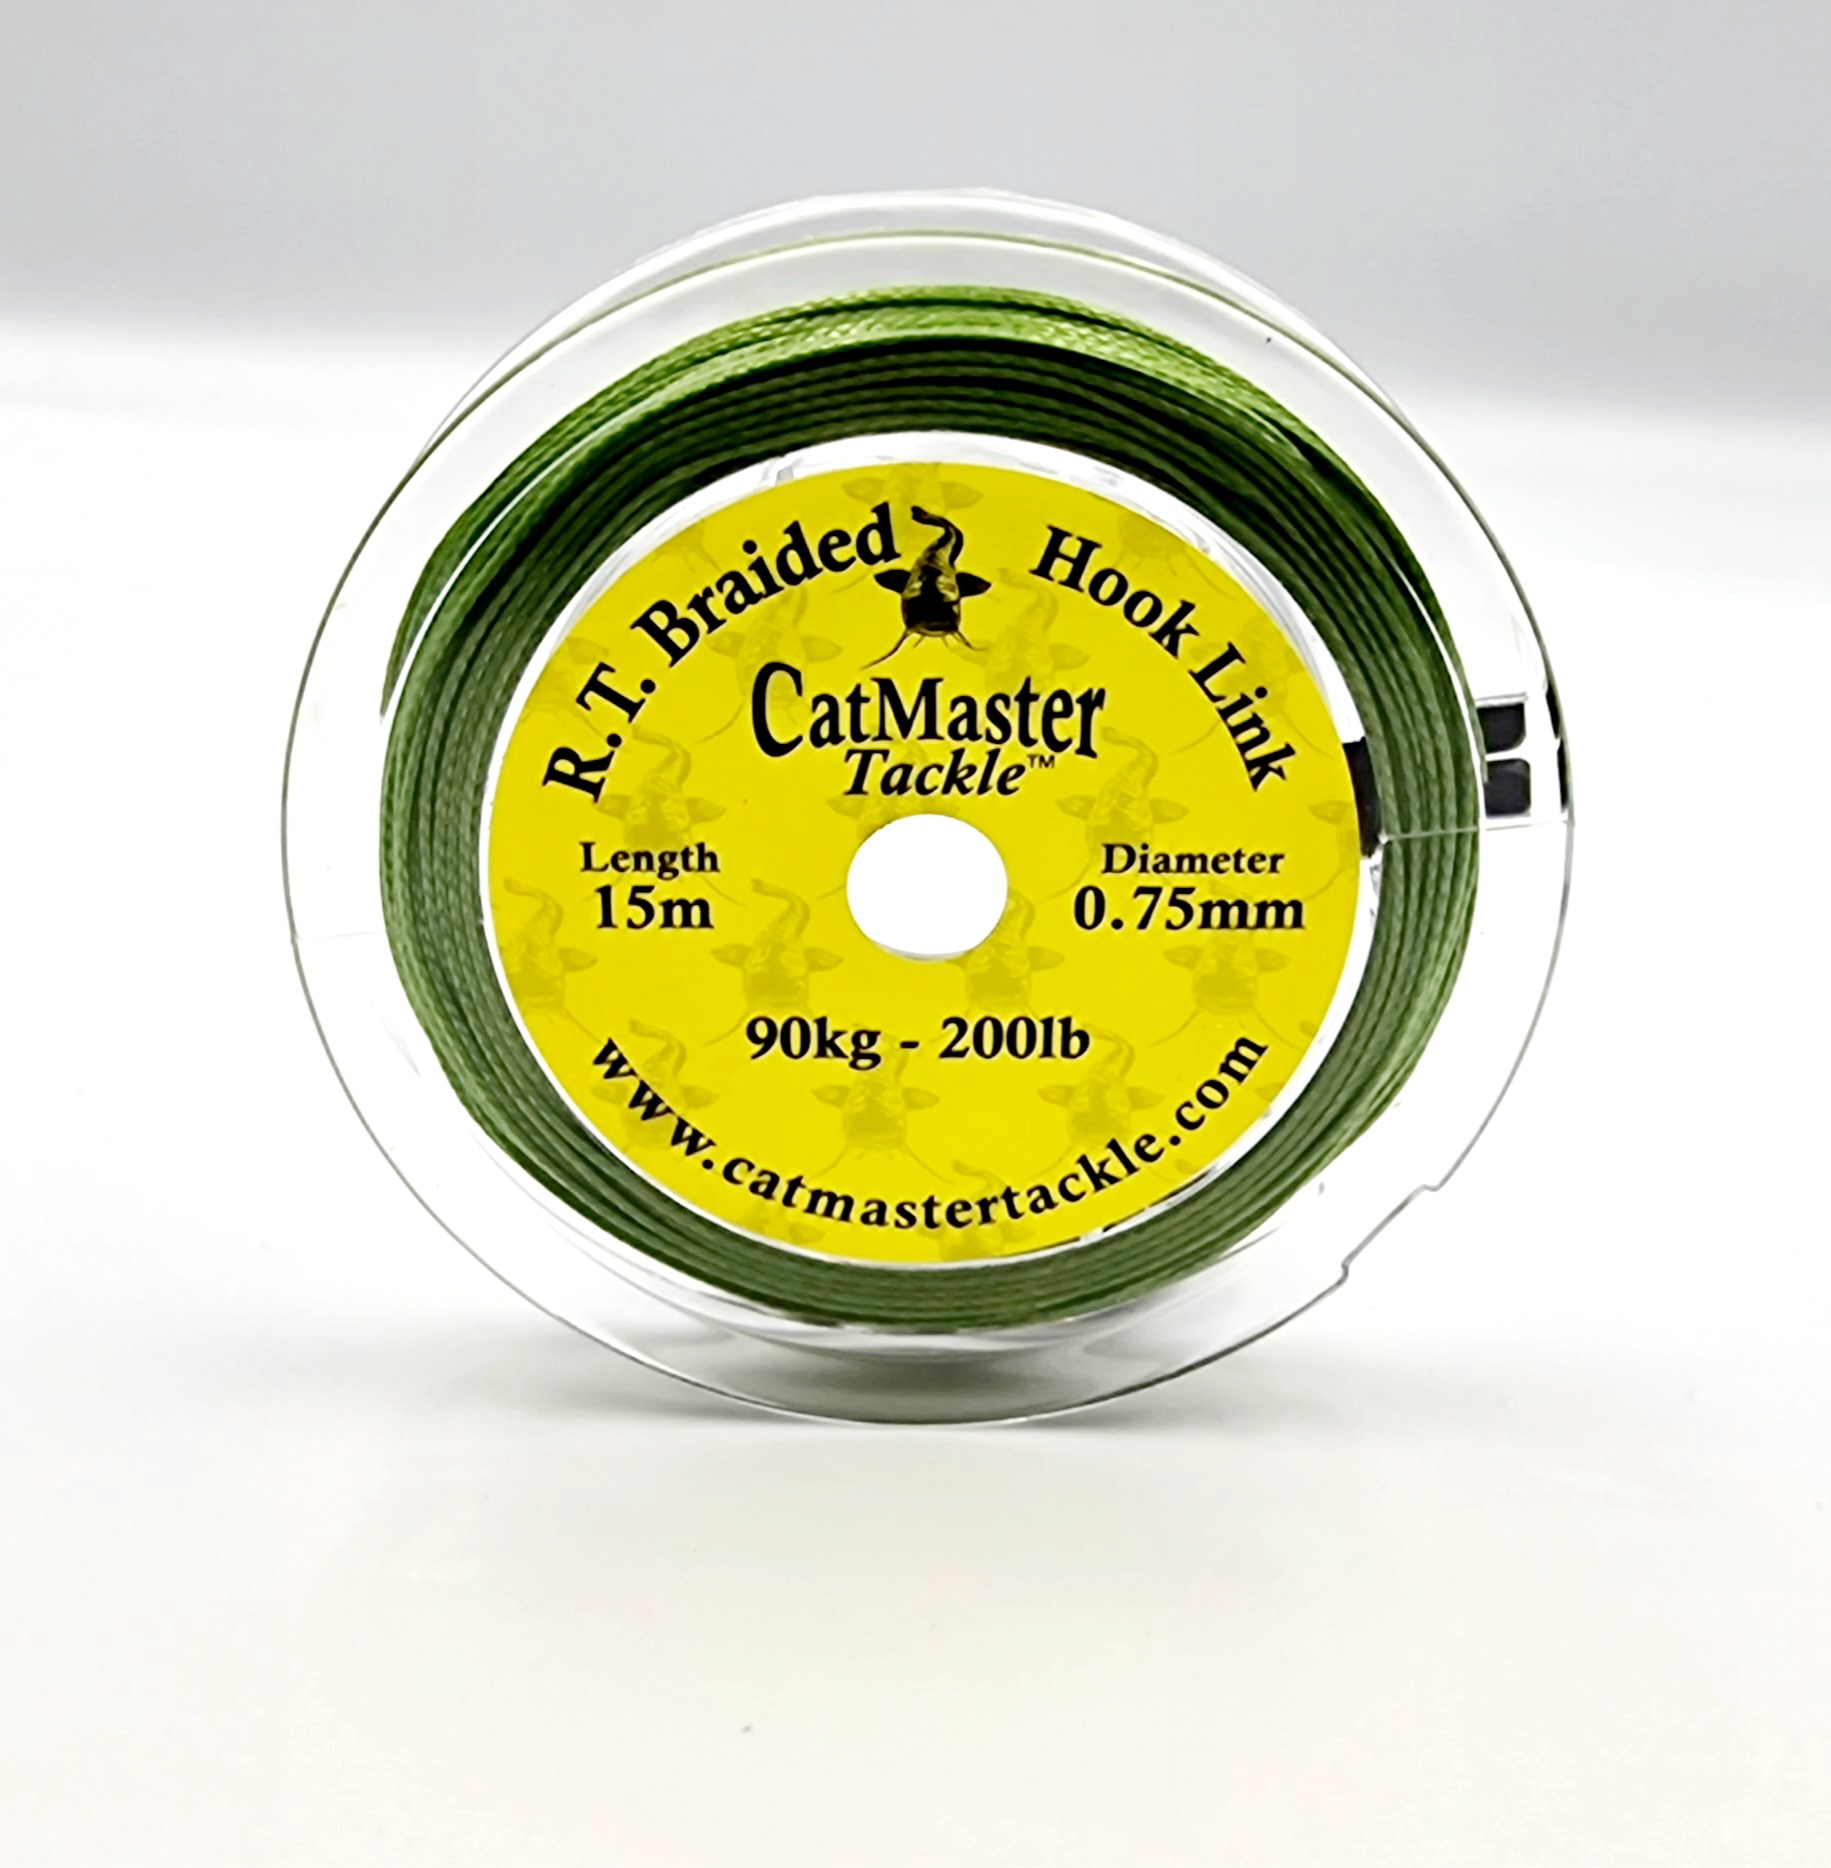 CatMaster Tackle R.T. Braided Cat Leader 200lb Green 15 Metre Spool